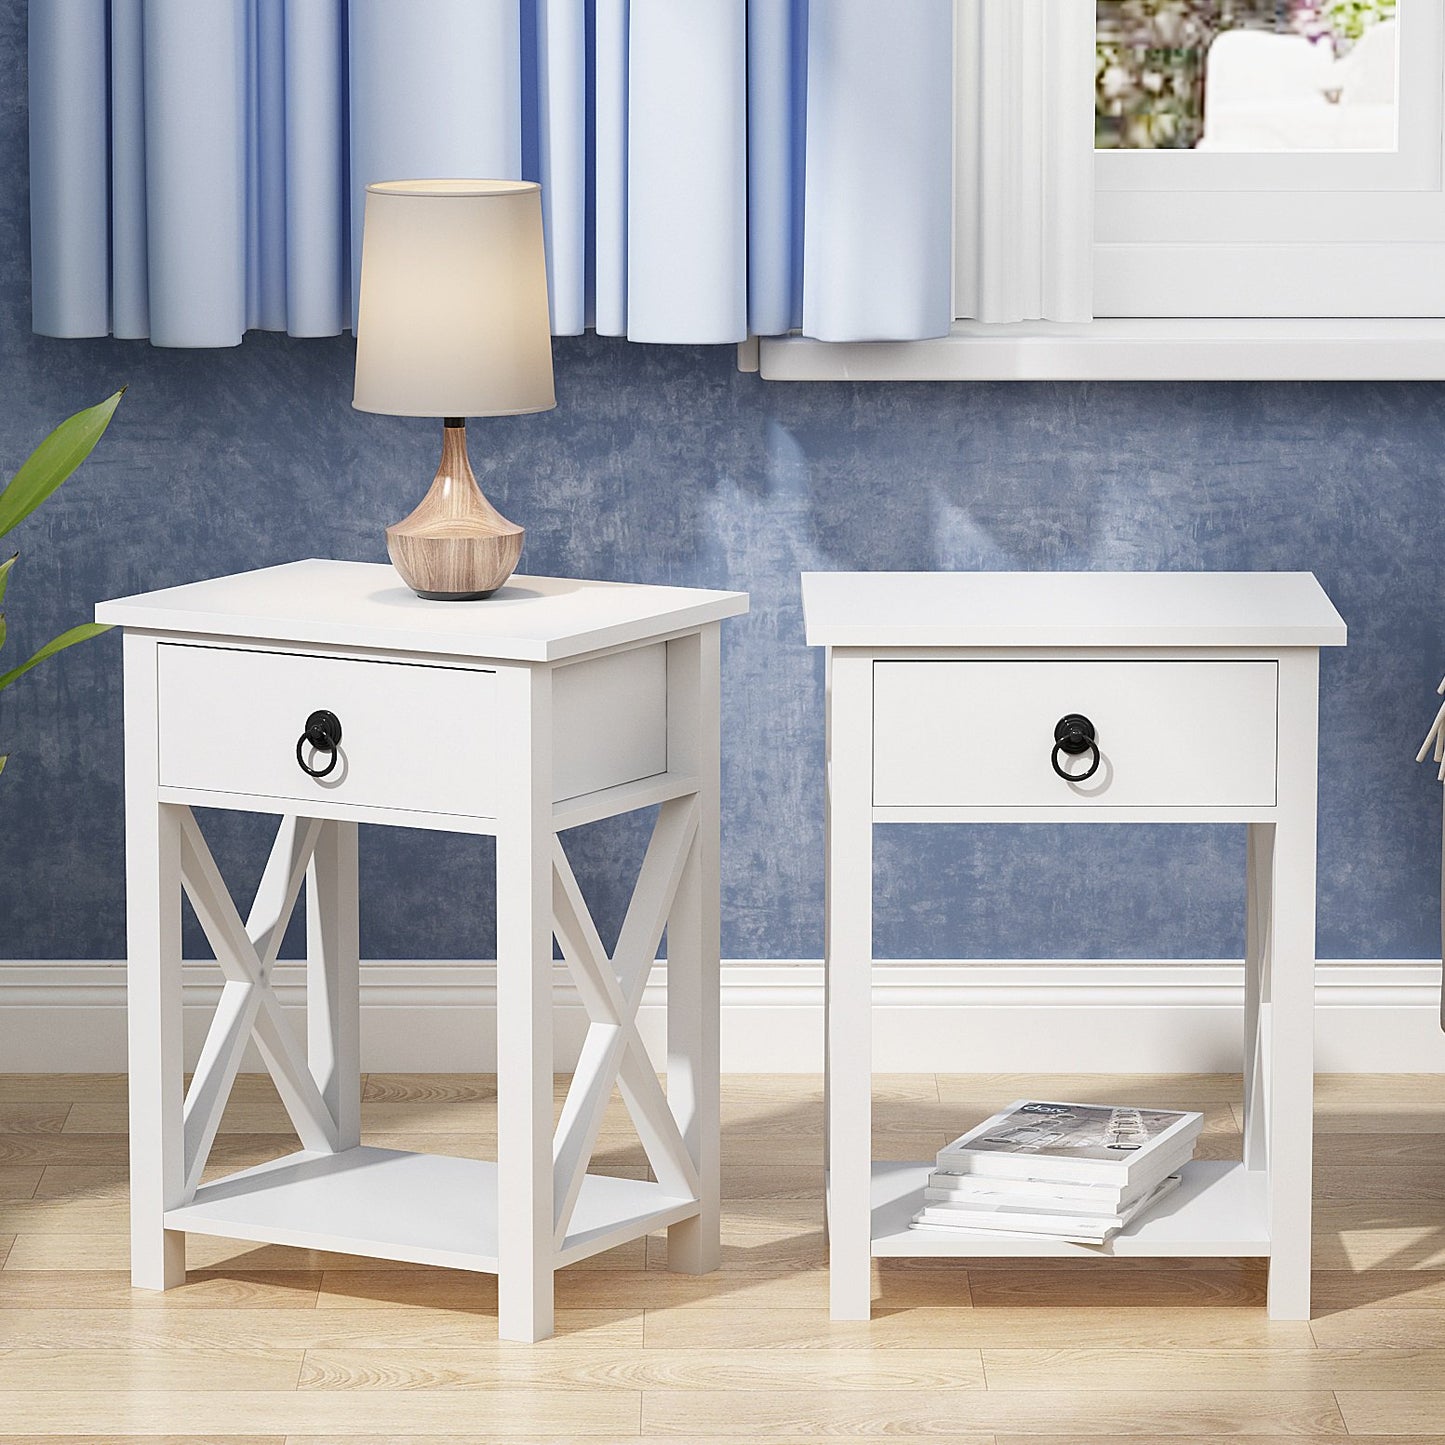 2PCS Rustic Nightstand with Drawers, Modern Wood Side Table with X-Shape Metal Sides, Rustic White End Table Furniture for Living Room Bedroom Office